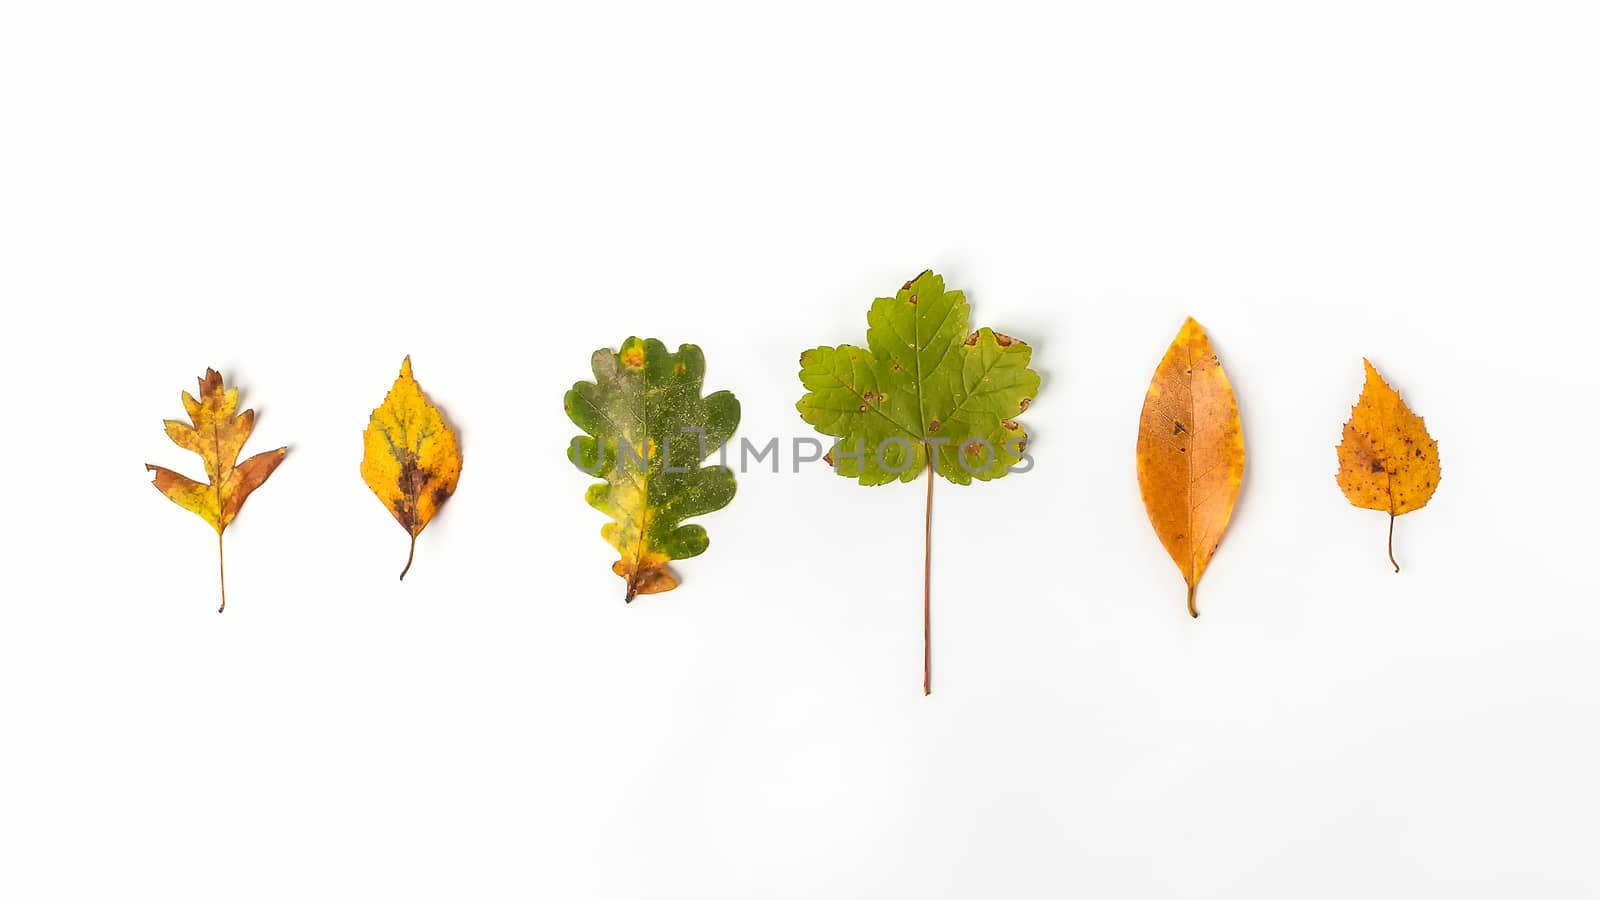 Different types of autumn leaves lined up on a white background. Oak, beech, maple, chestnut, birch.